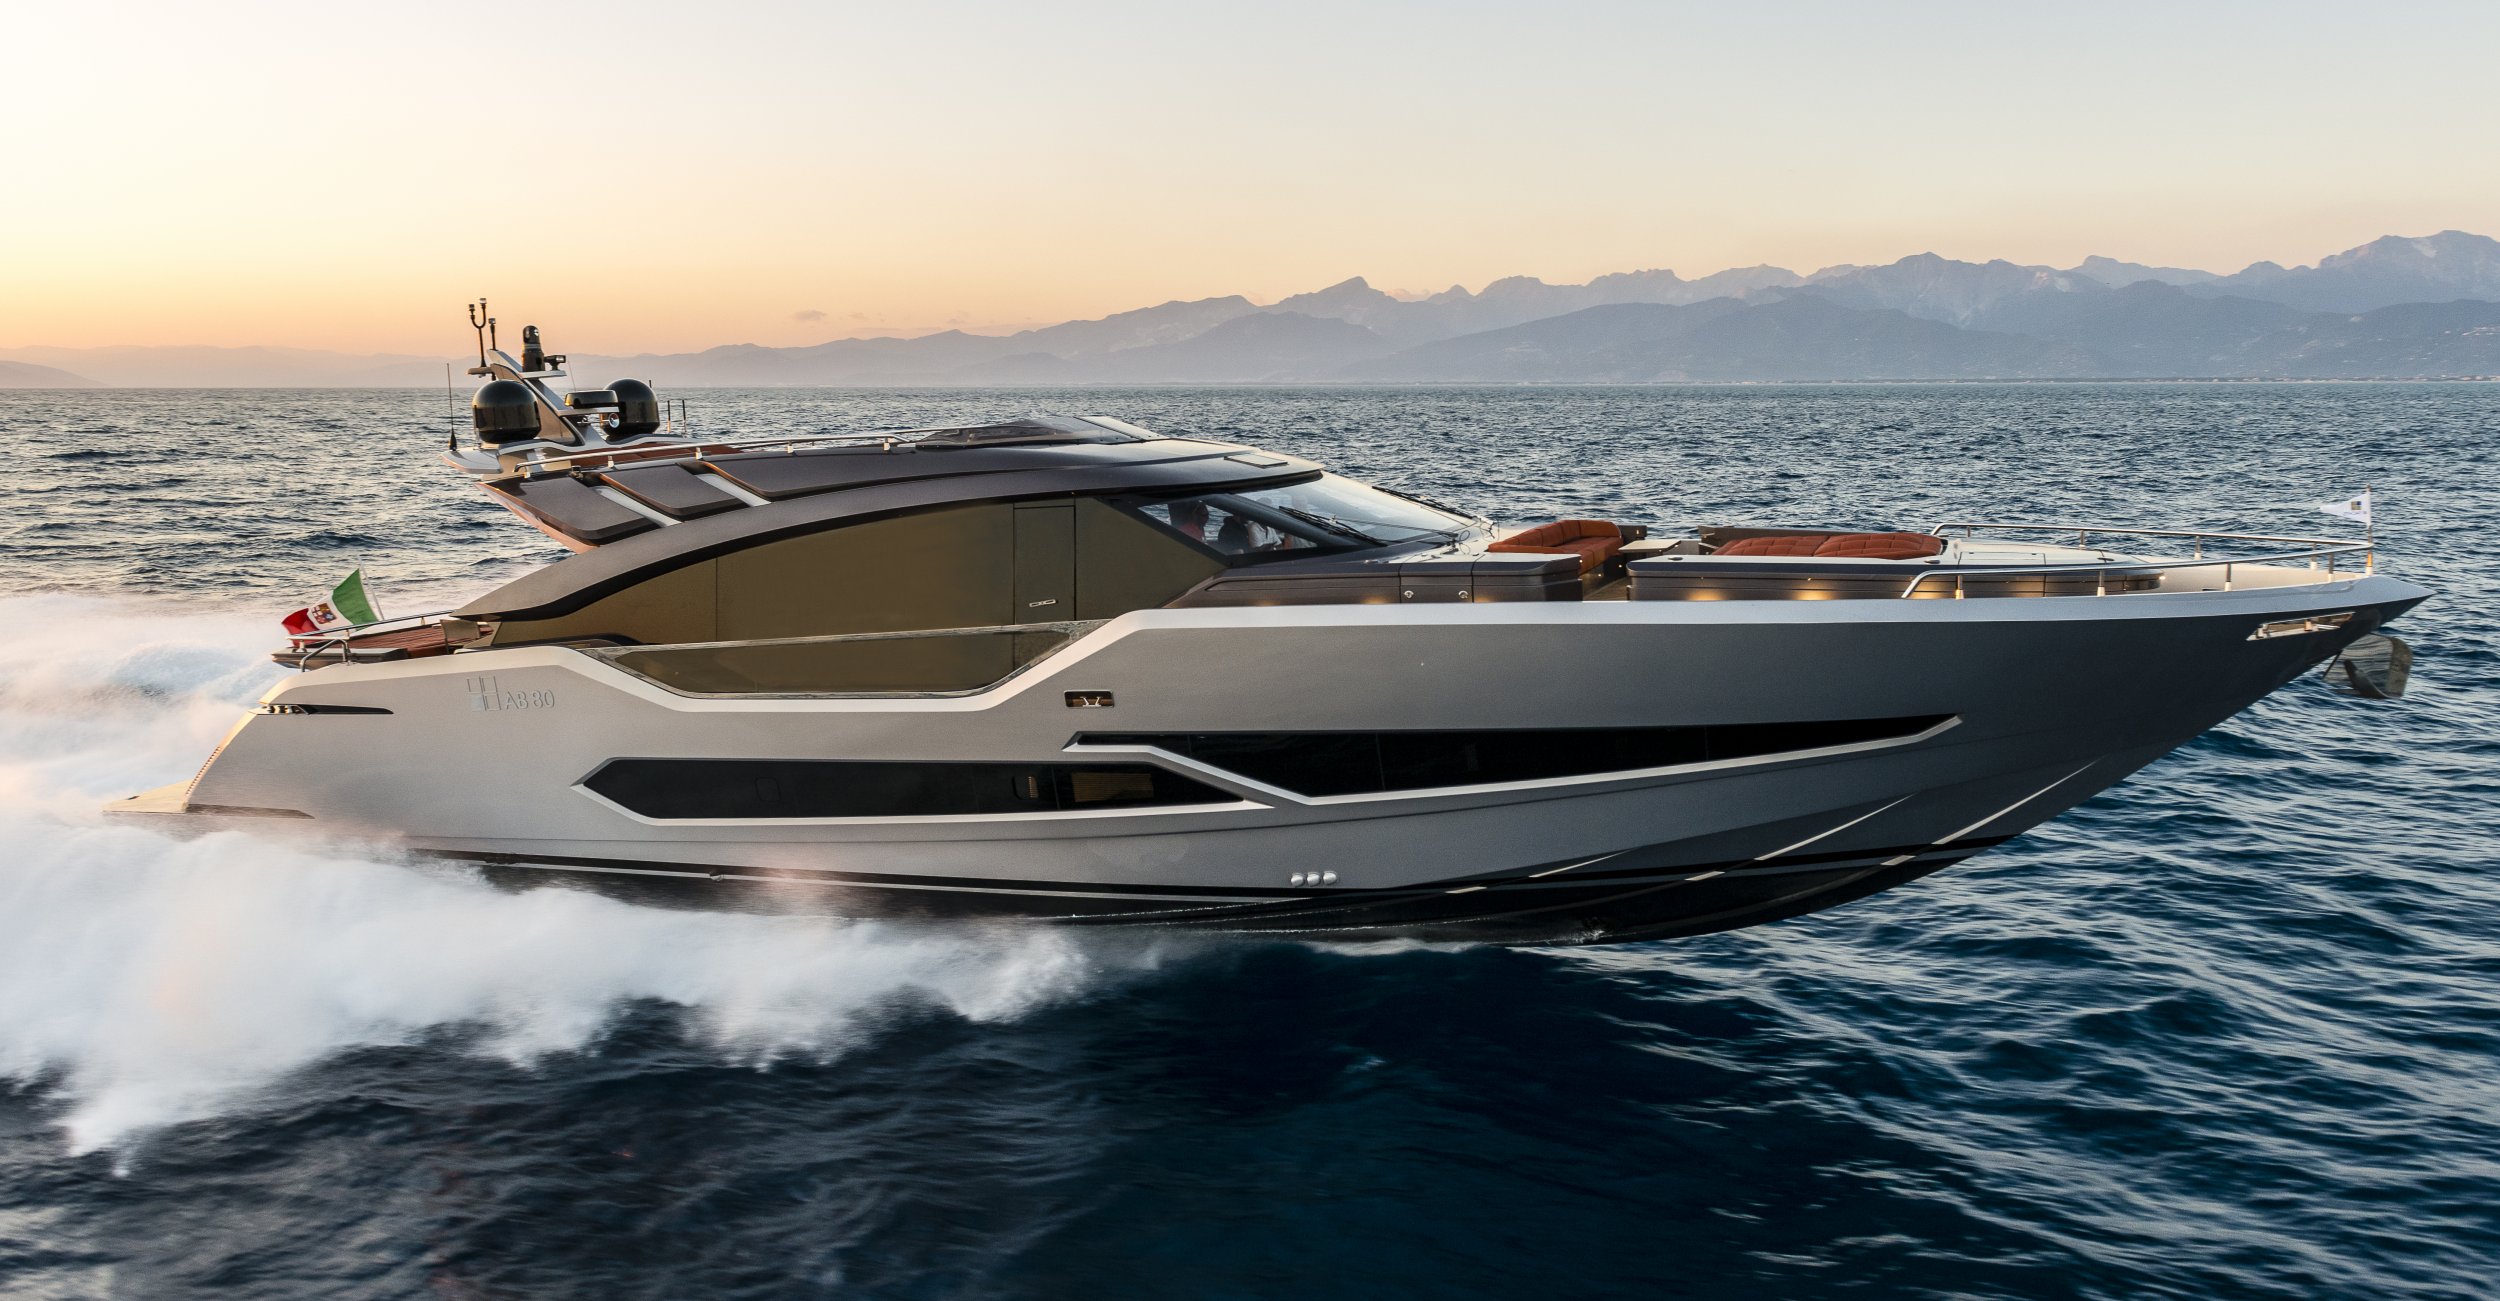 AB 100 superfast yacht is available!